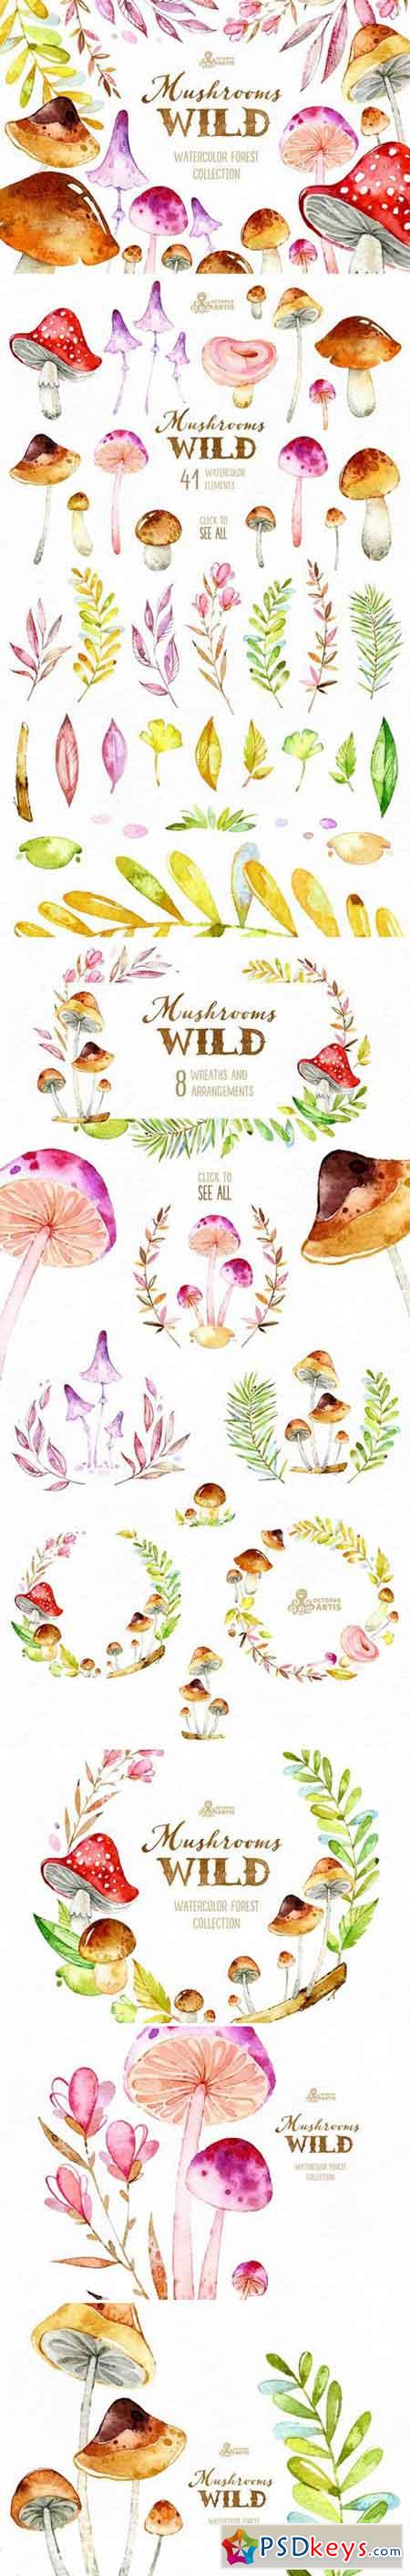 Wild Mushrooms Forest Collection 1596828